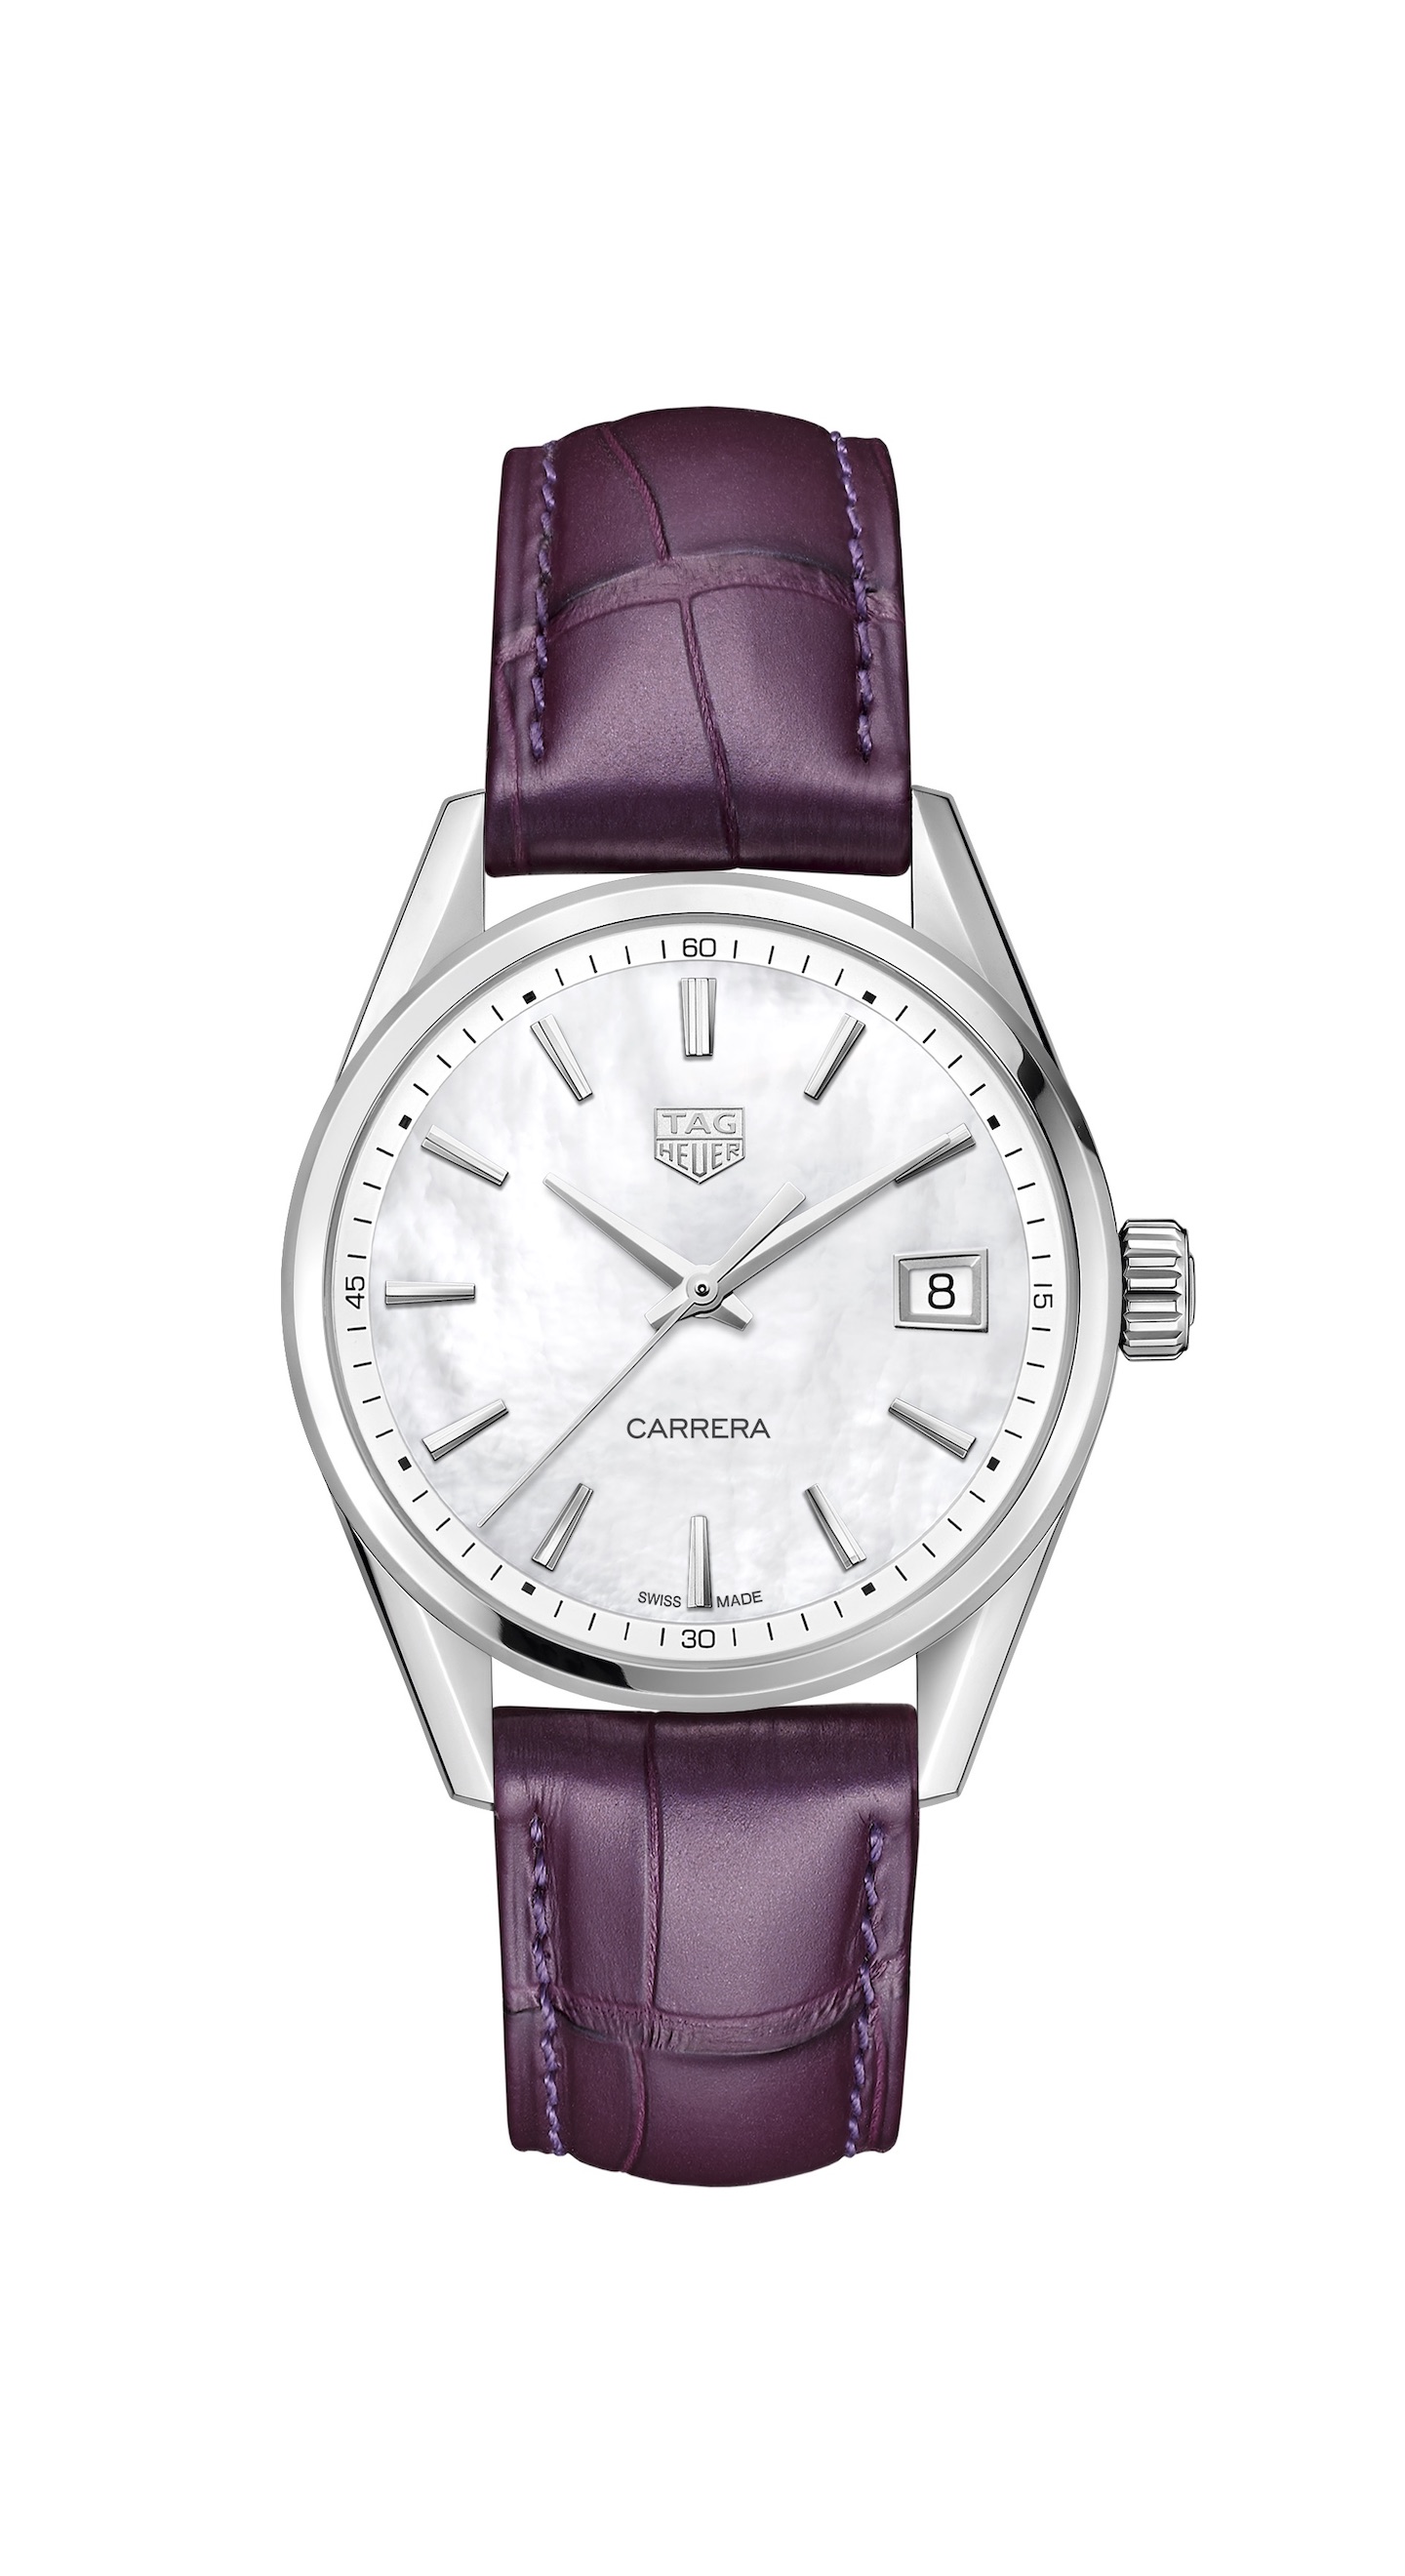 New TAG Heuer Carrera Lady collection.